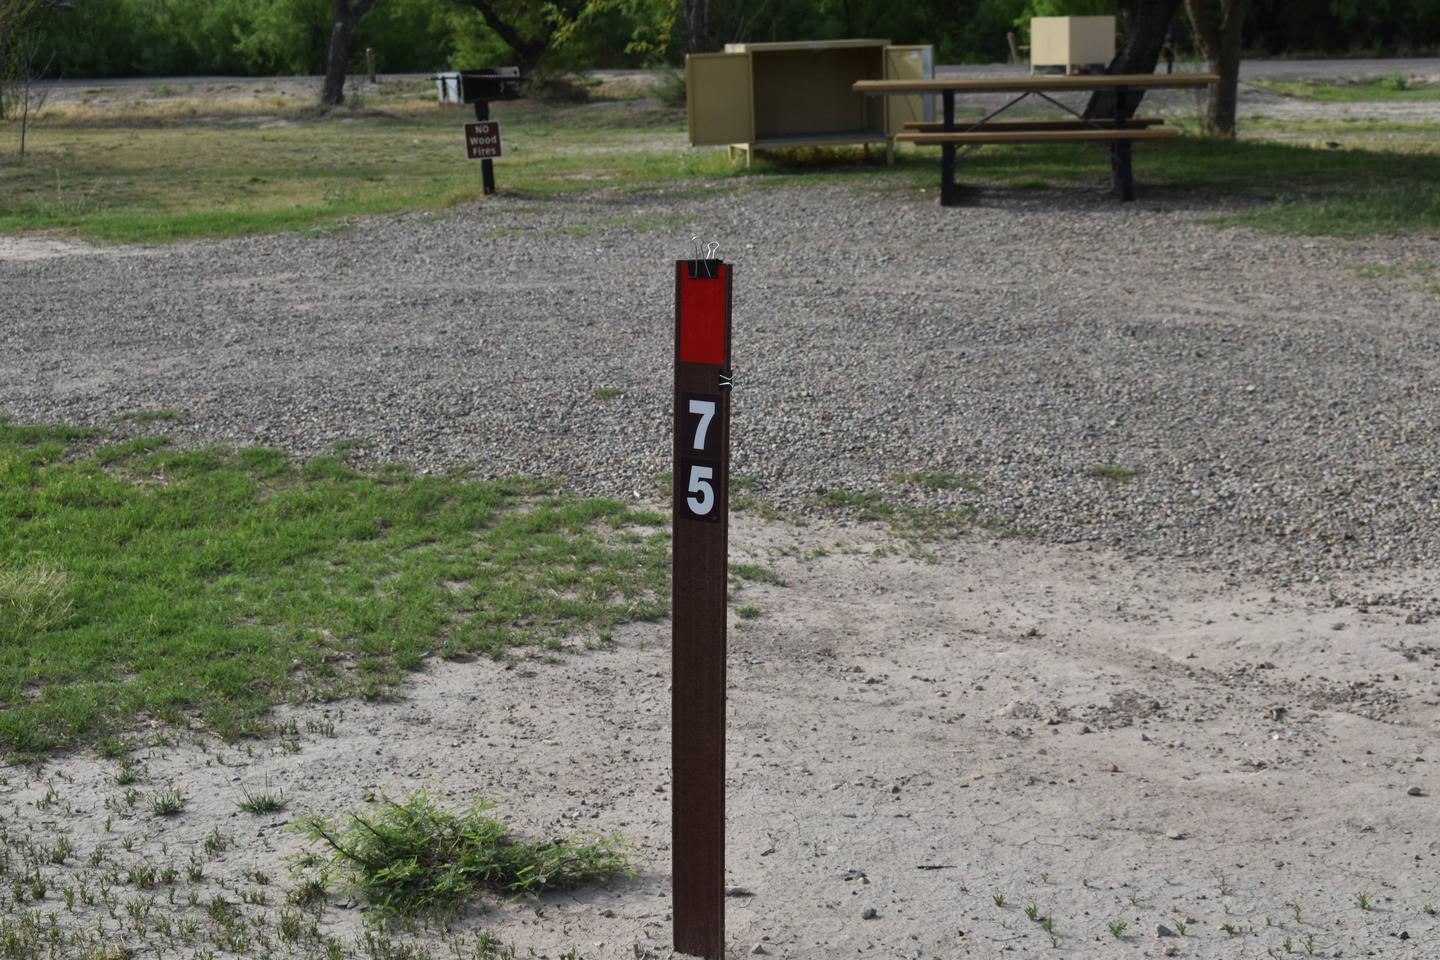 Brown site marker with red stickerSite marker for Site 75